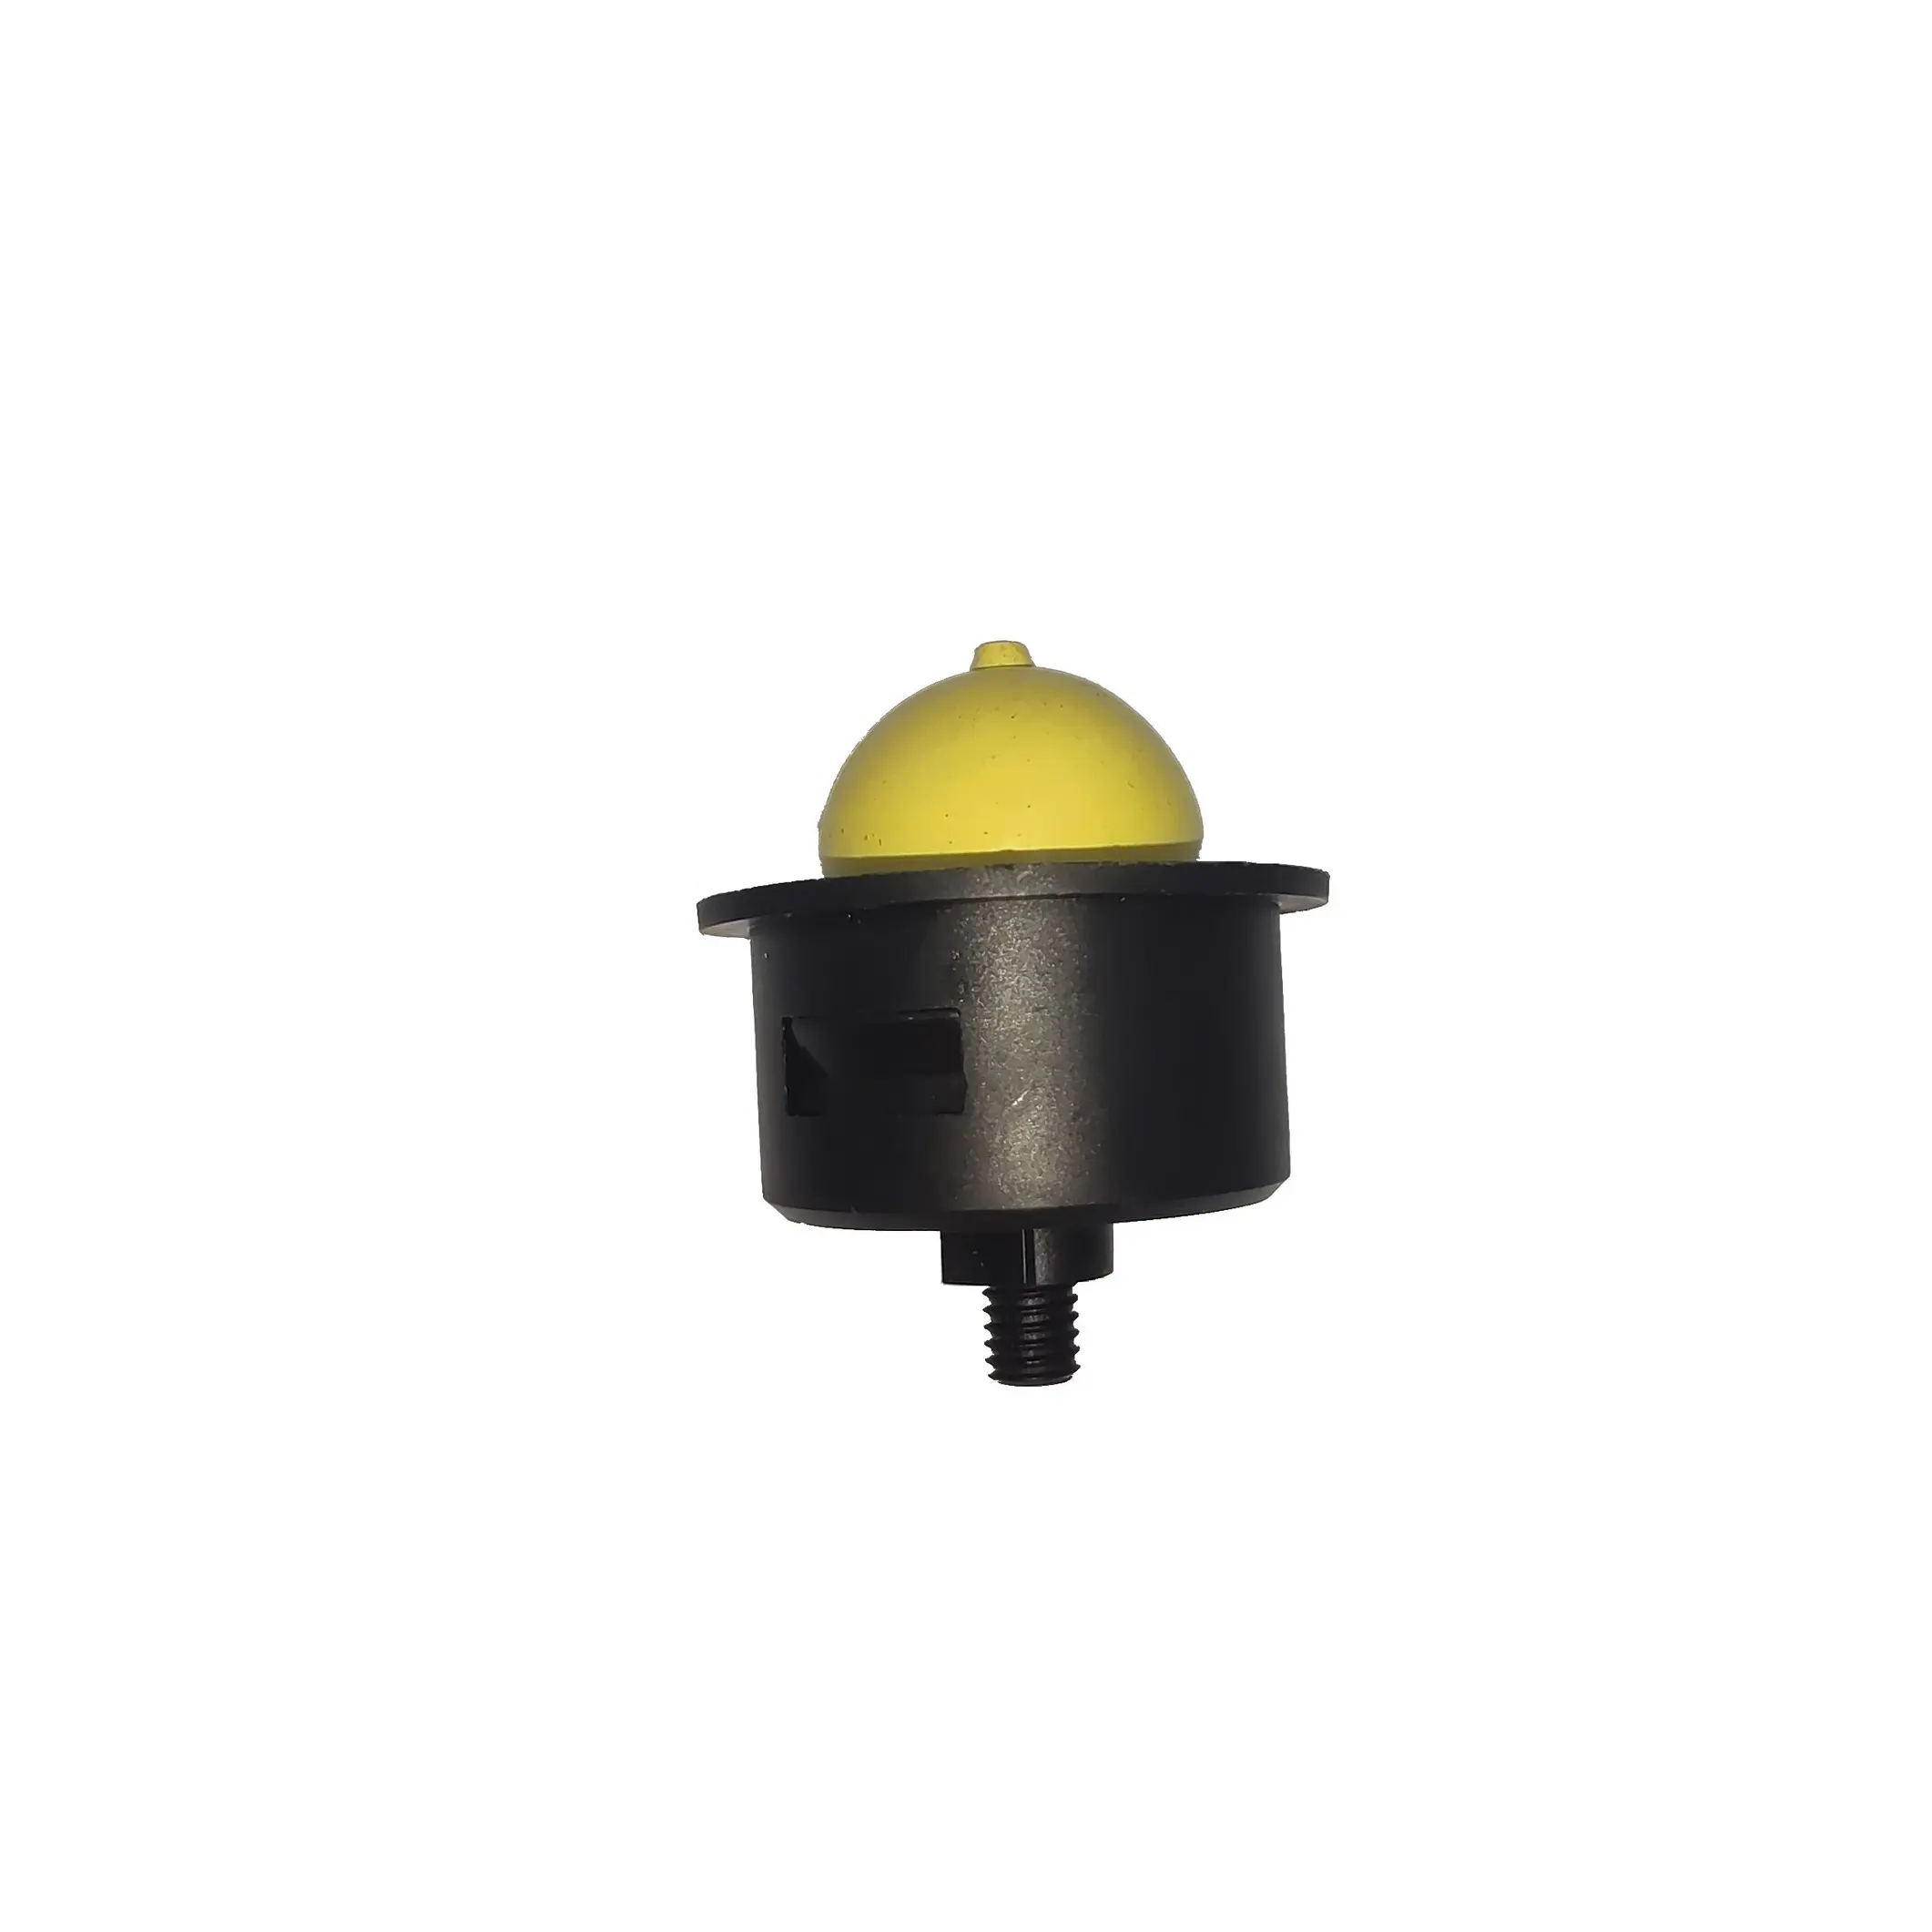 Lawn Mower Primer Bulb For T475 Billy Goat Lawnmower Blower Engine Garden Tools Spare Parts